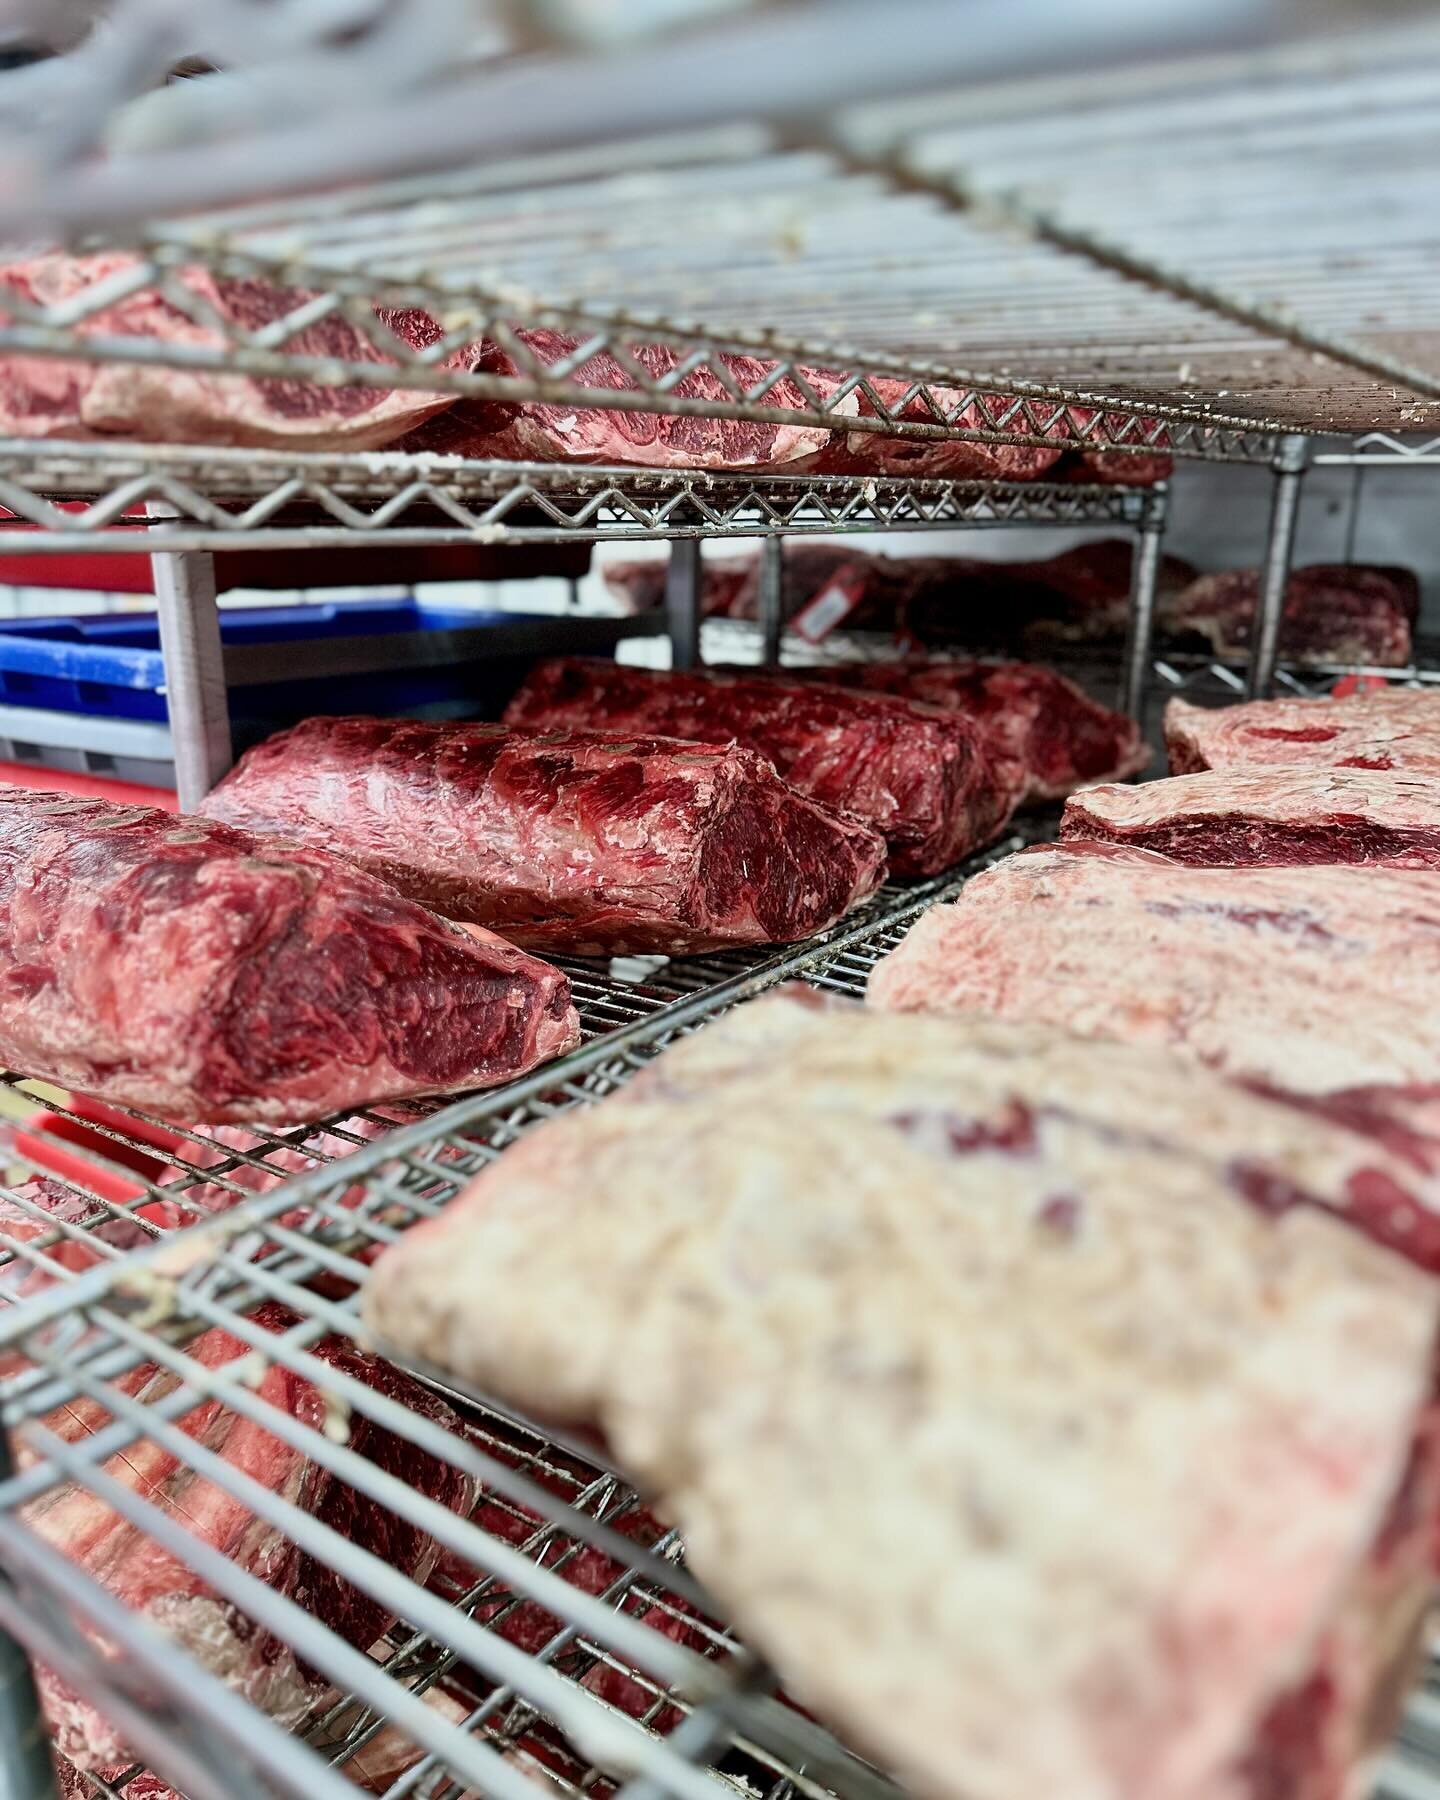 Dry Aged // we control the temperature, airflow and humidity to create the perfect steakhouse flavor you&rsquo;ve come to expect from #bushbrothers 🥩

#bushbros #dryaged #dryagedbeef #dryagedsteak